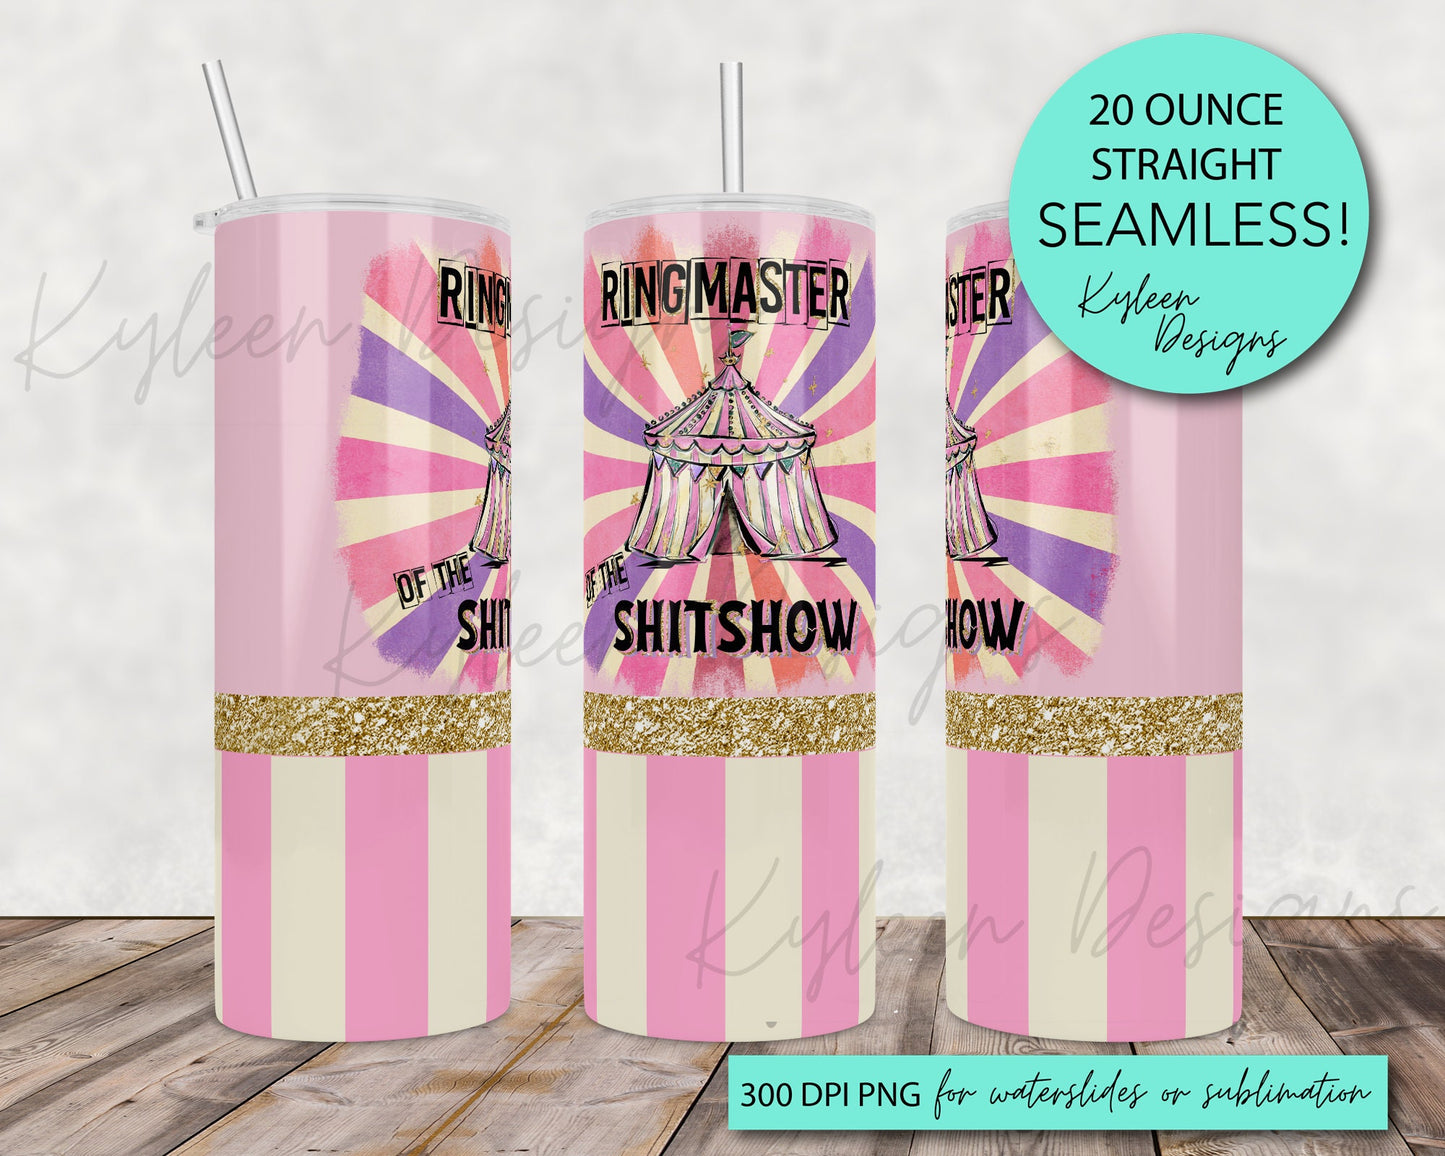 SEAMLESS 20 ounce wrap Ringmaster of the shitshow for sublimation, waterslide High res PNG digital file- Straight only